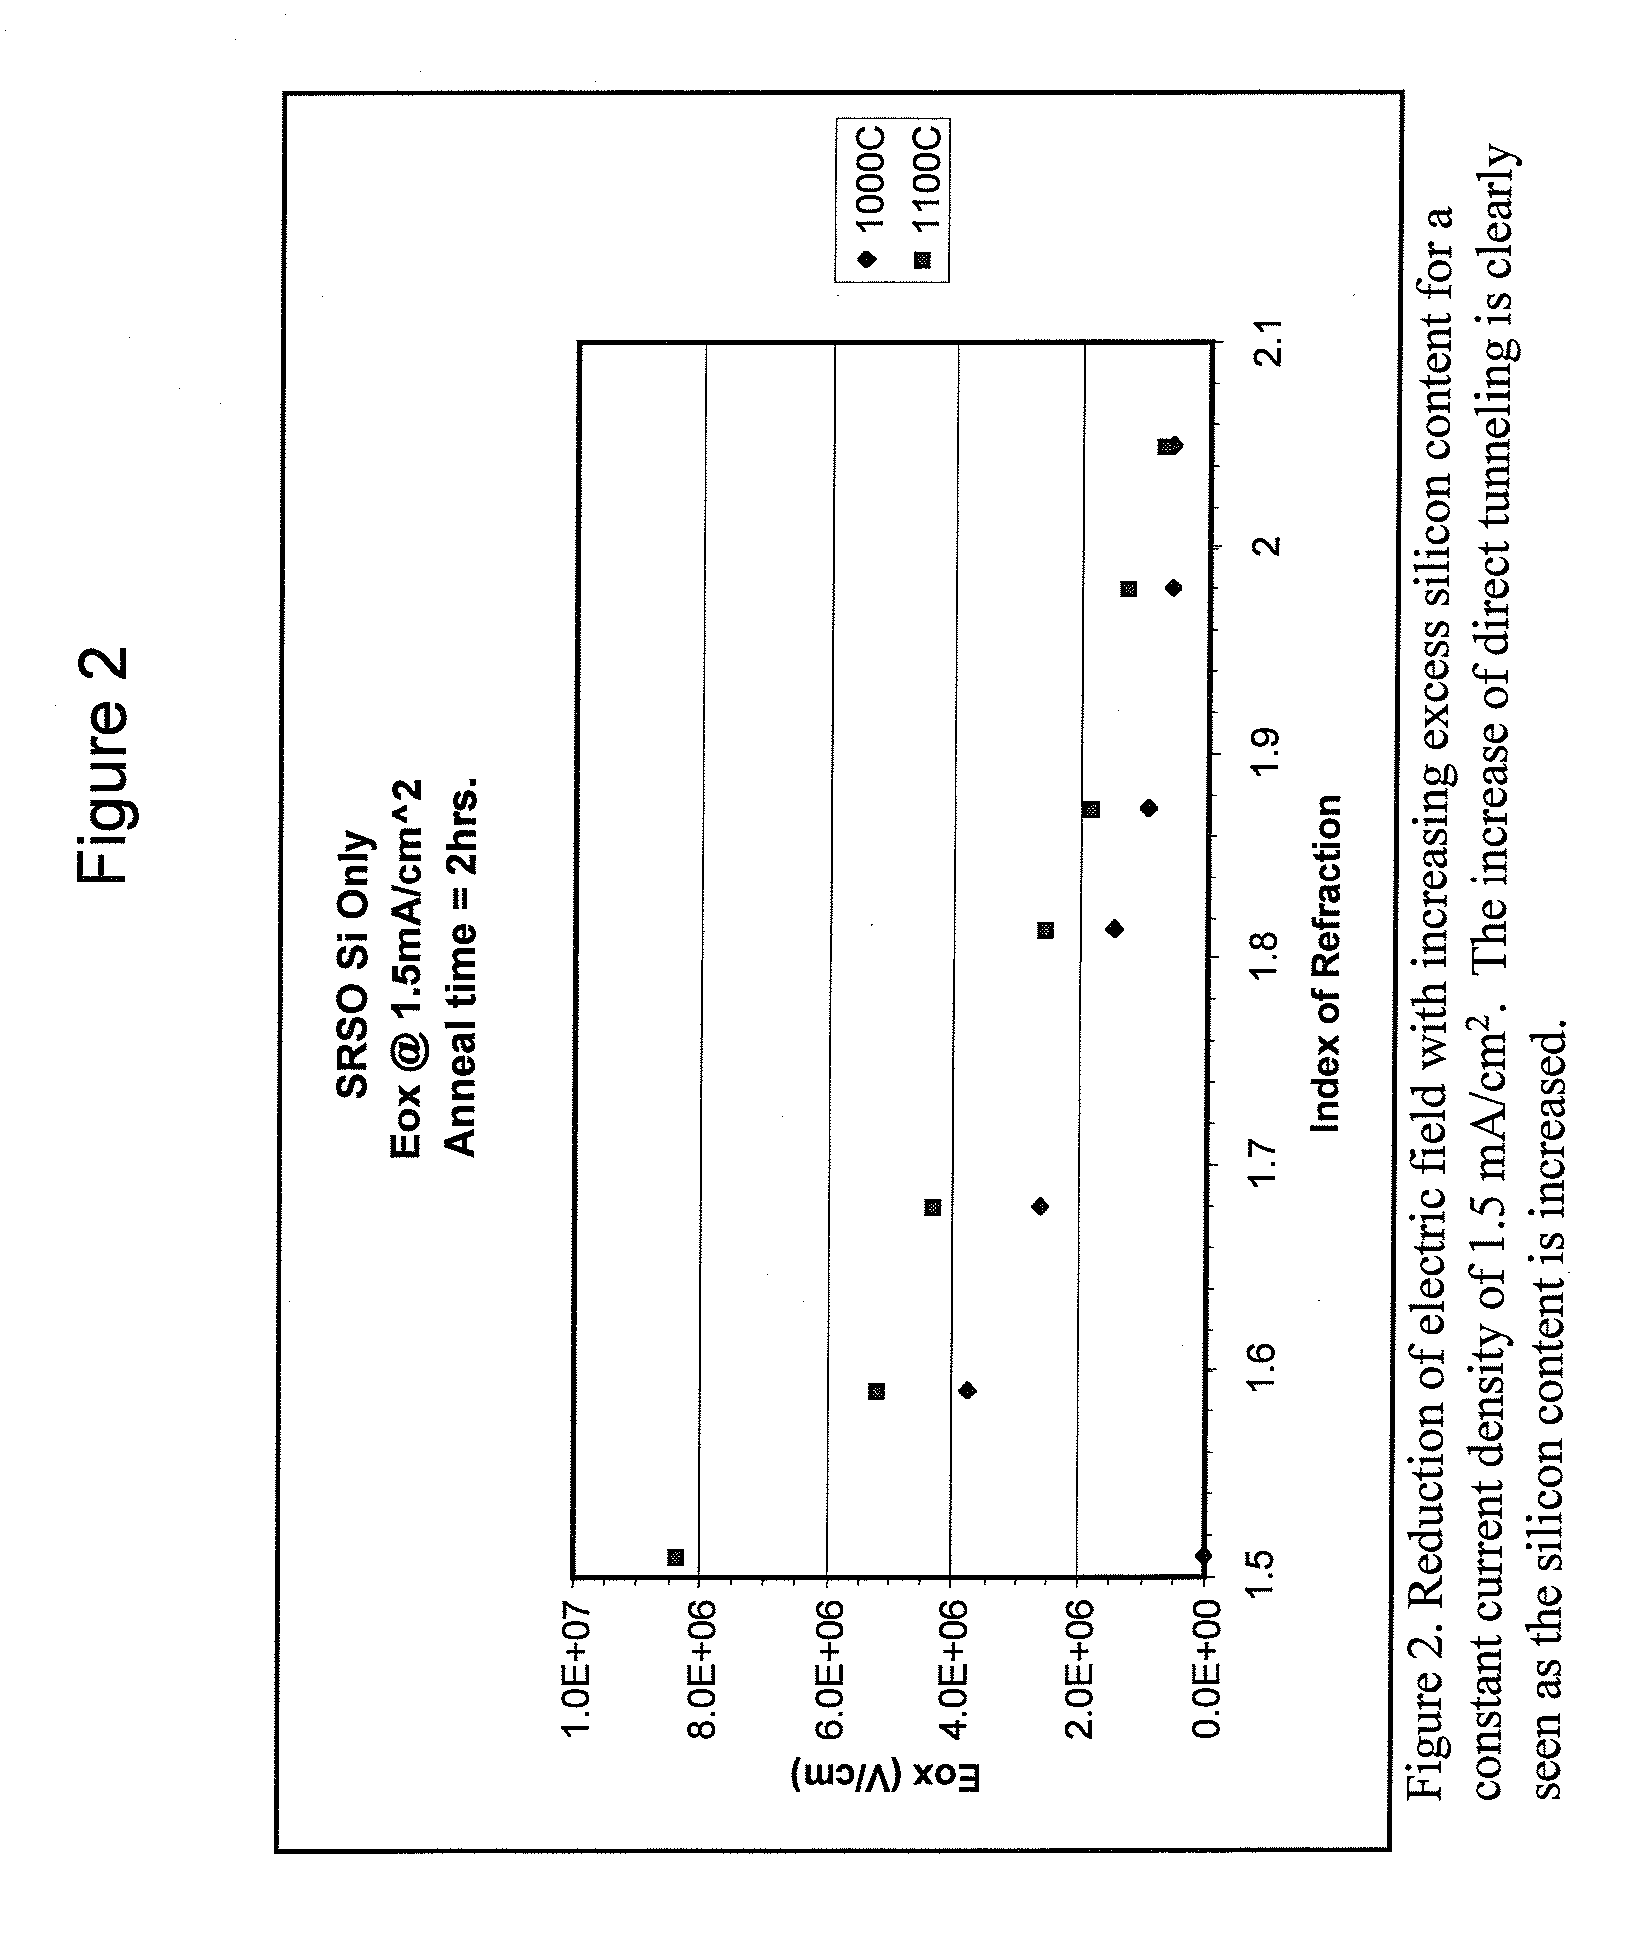 Pixel Structure For A Solid State Light Emitting Device